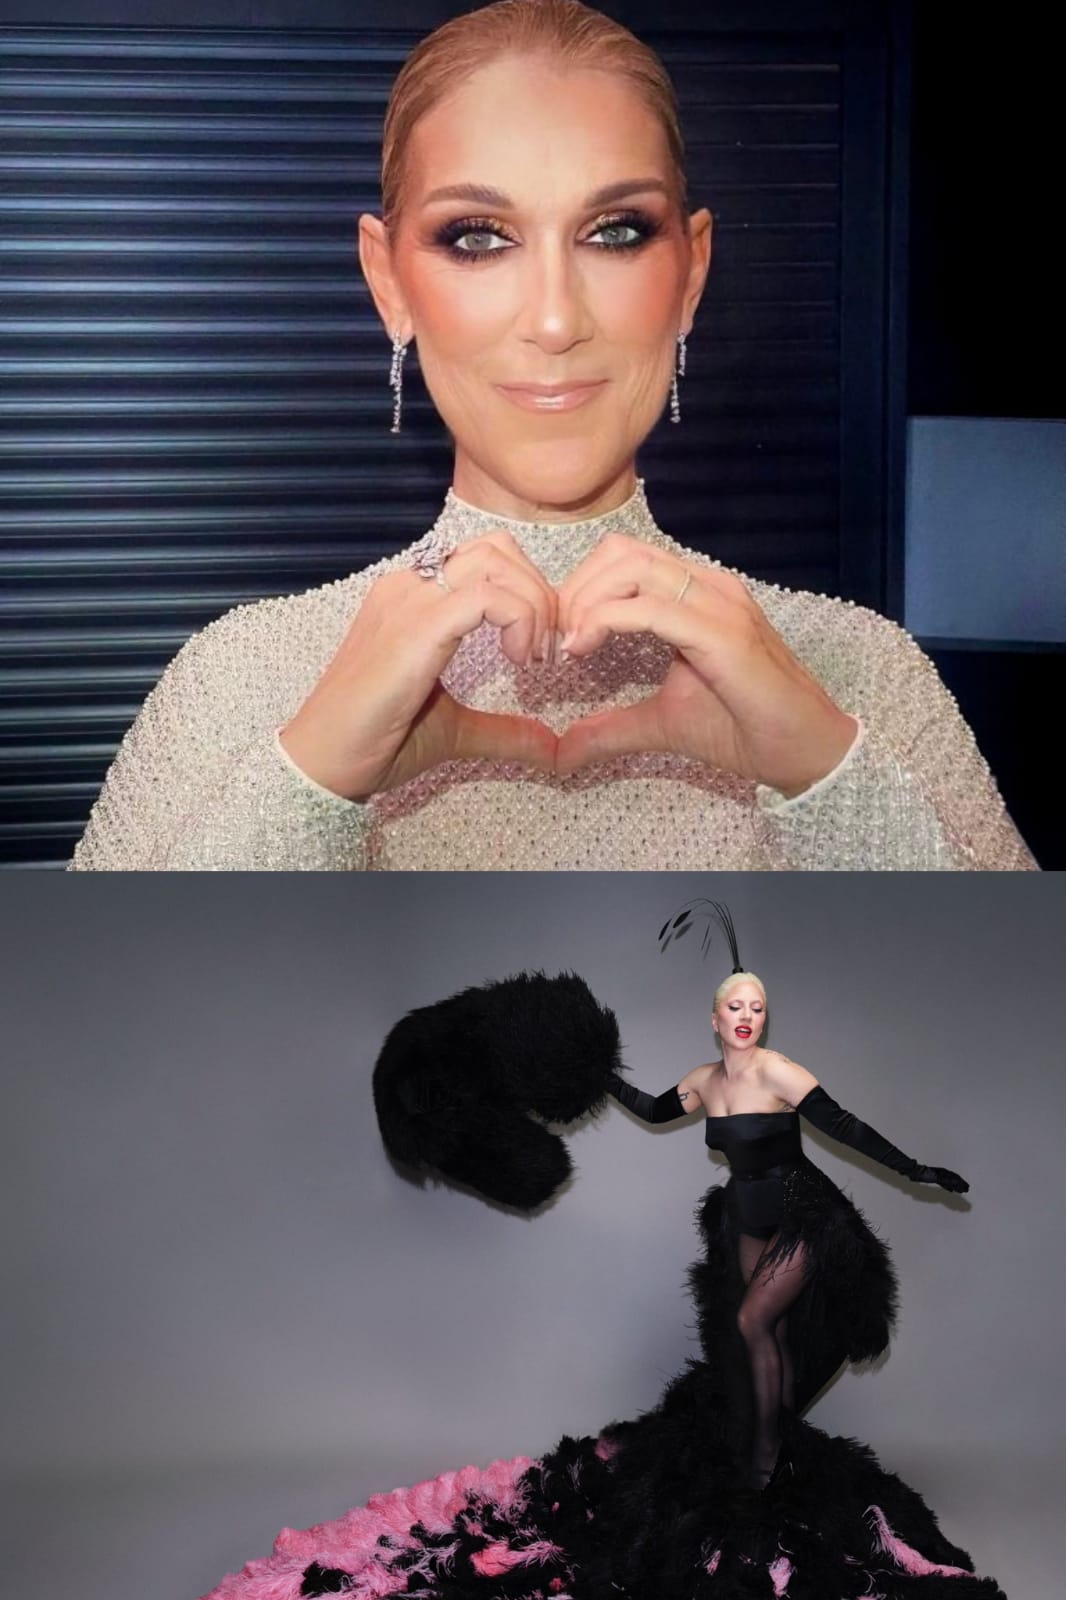 The picture taken from Lady Gaga Céline Dion X Account